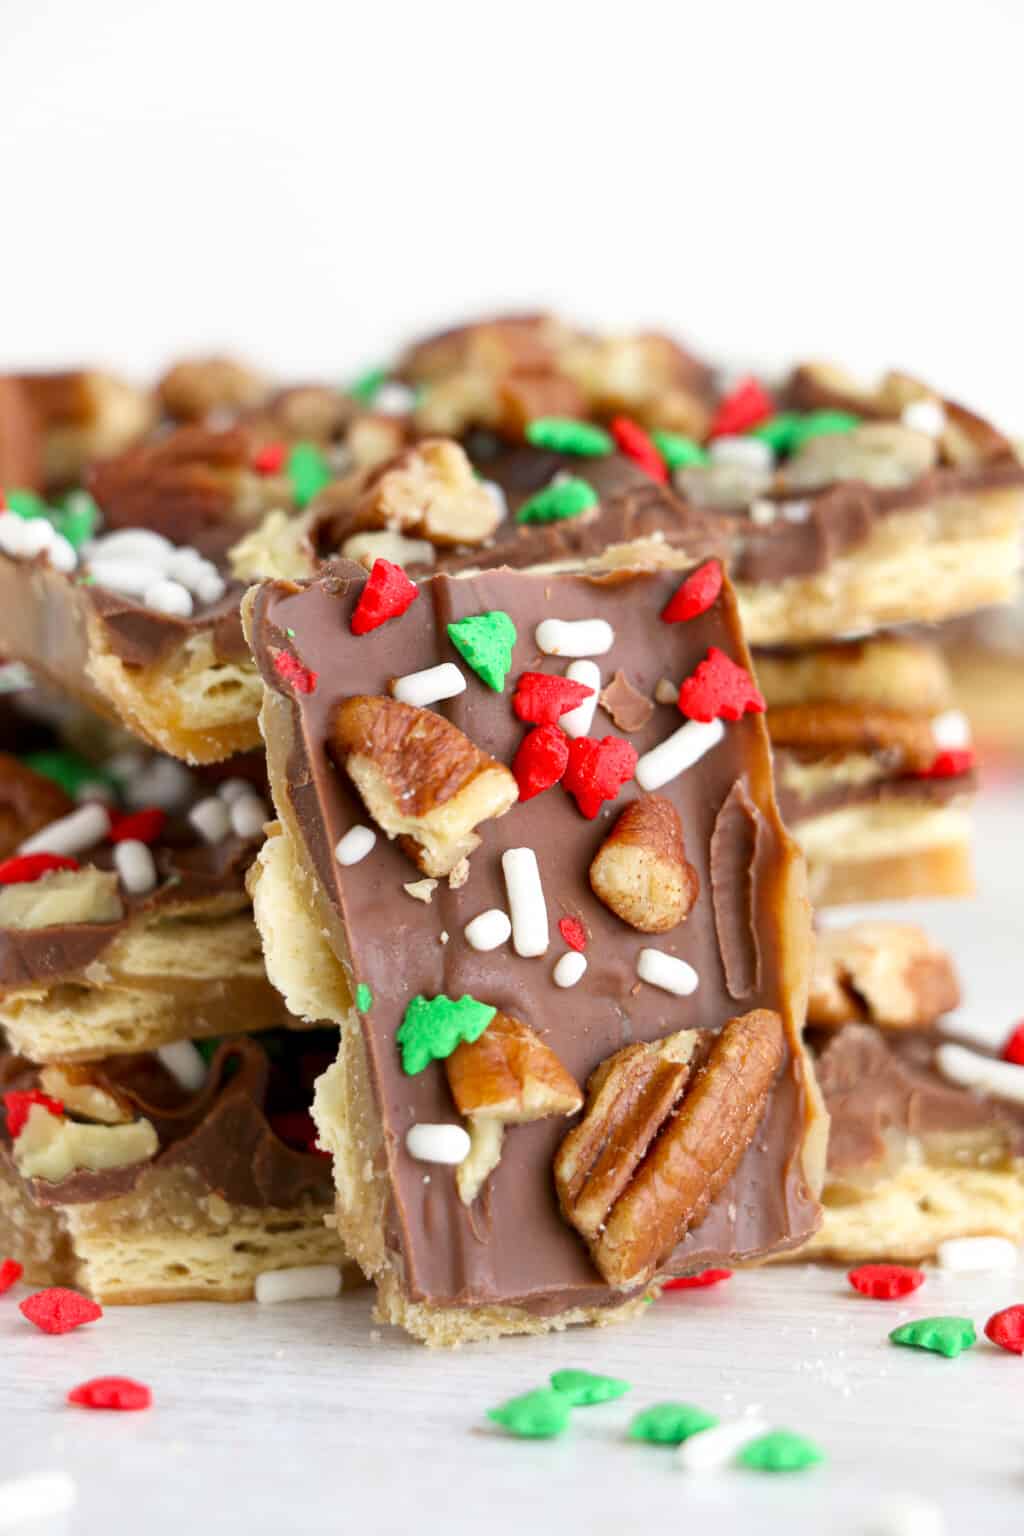 Christmas Crack (Cracker Toffee) Recipe - The Cookie Rookie®